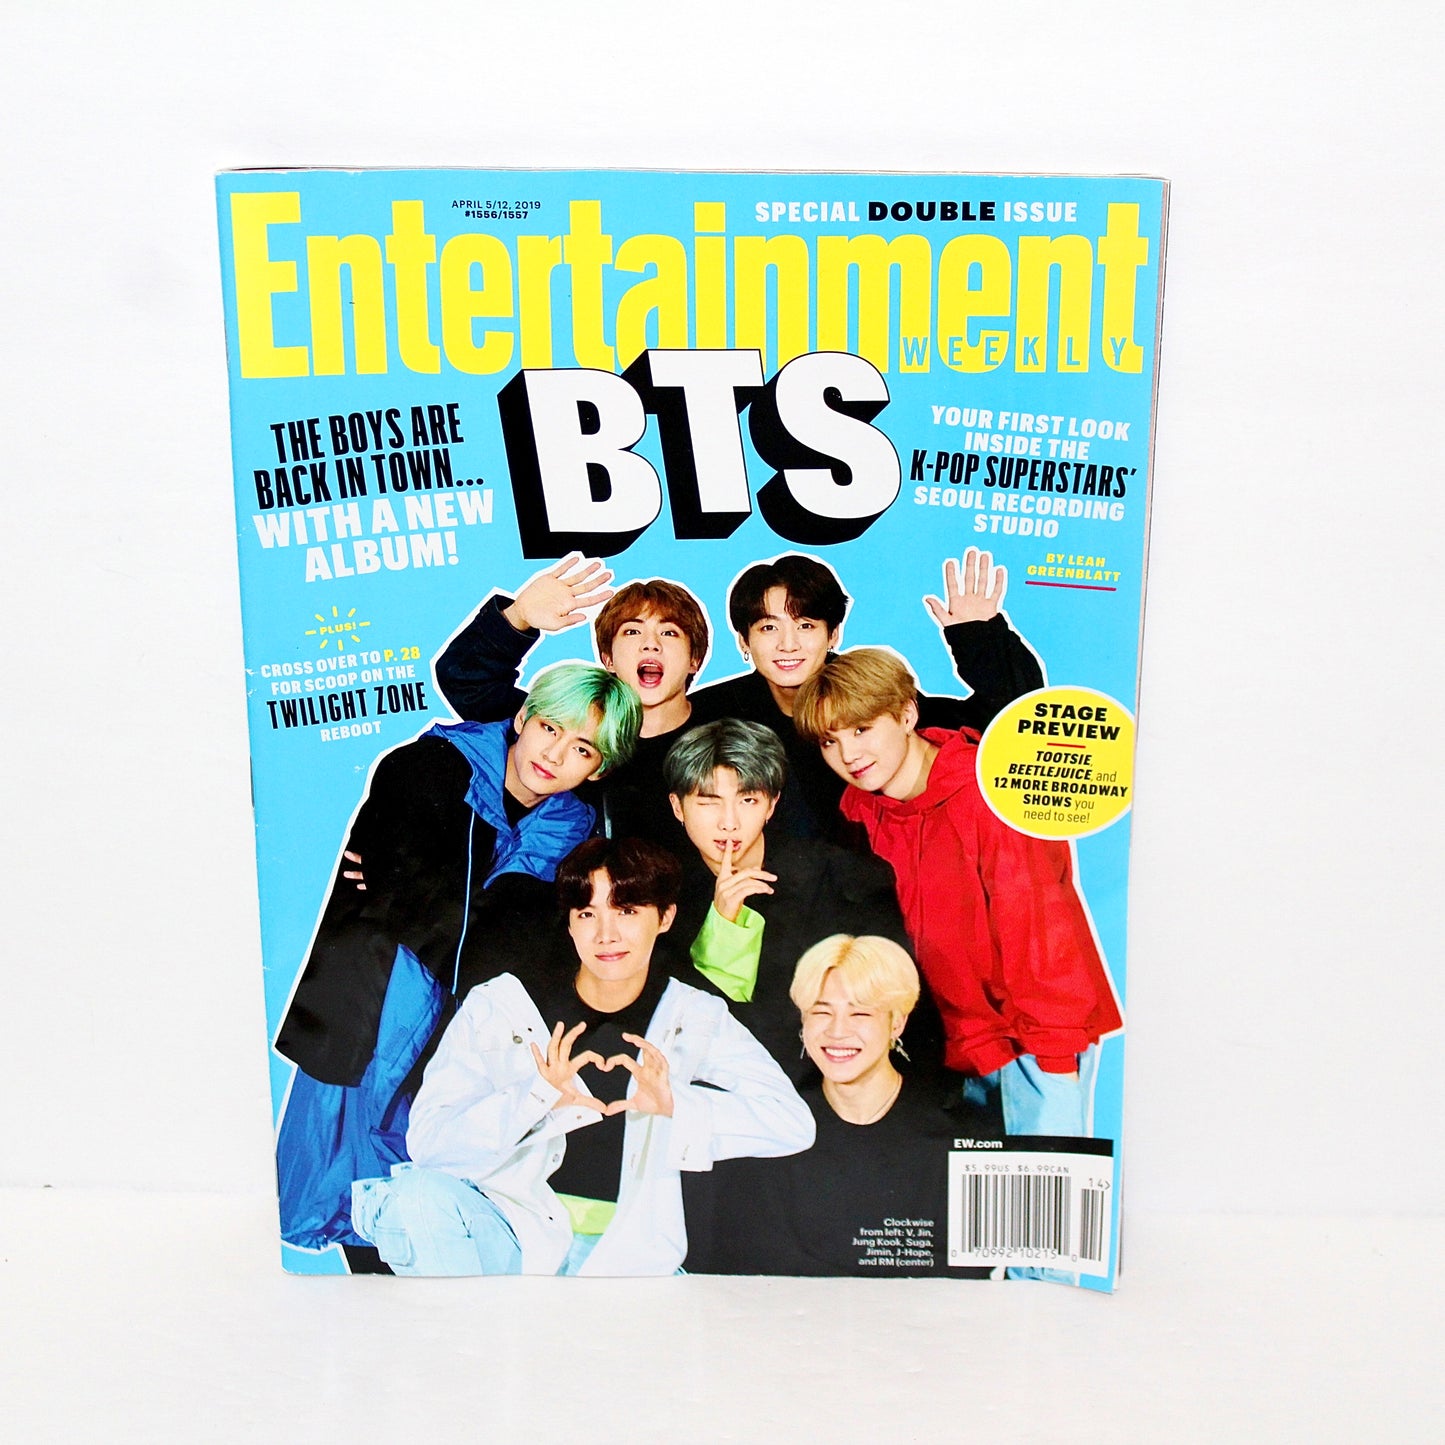 Entertainment Weekly April 2019 Special Double Issue with BTS